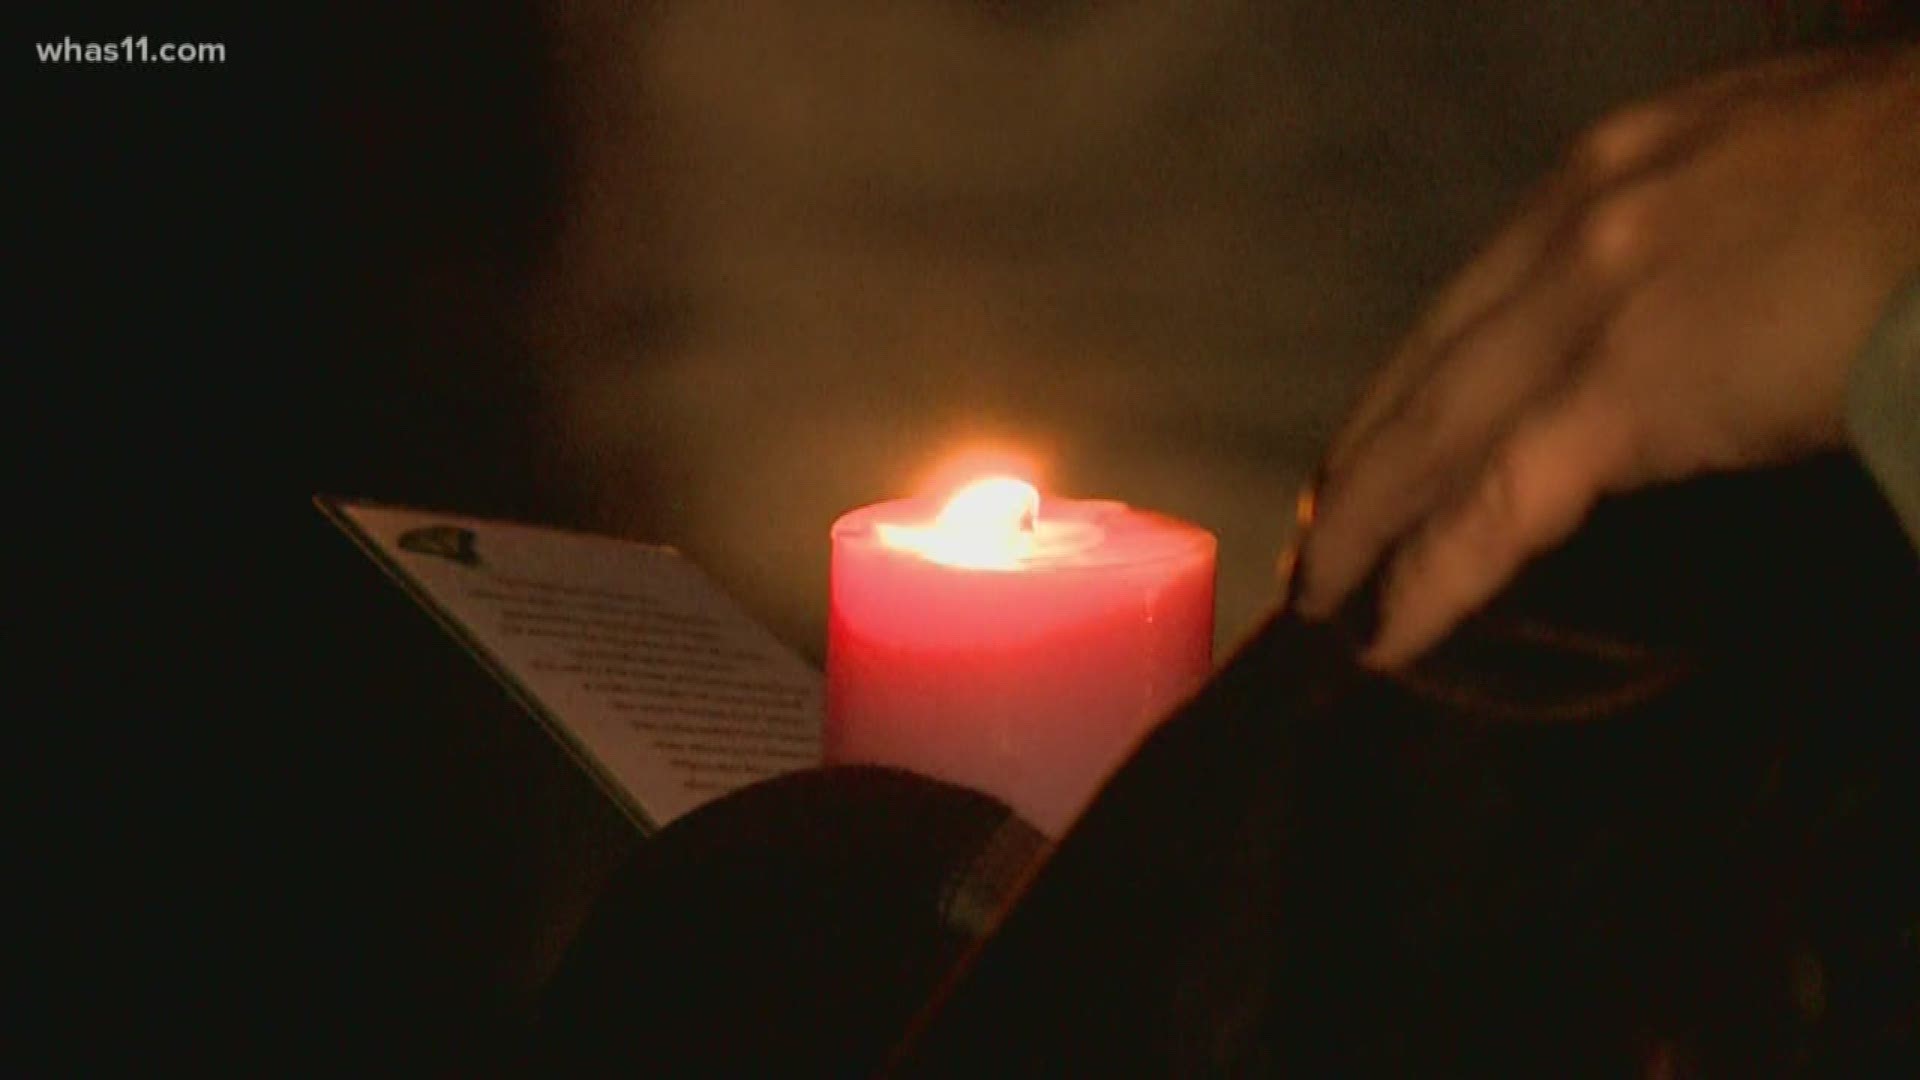 The mothers of the two victims held a vigil in the Southside neighborhood.